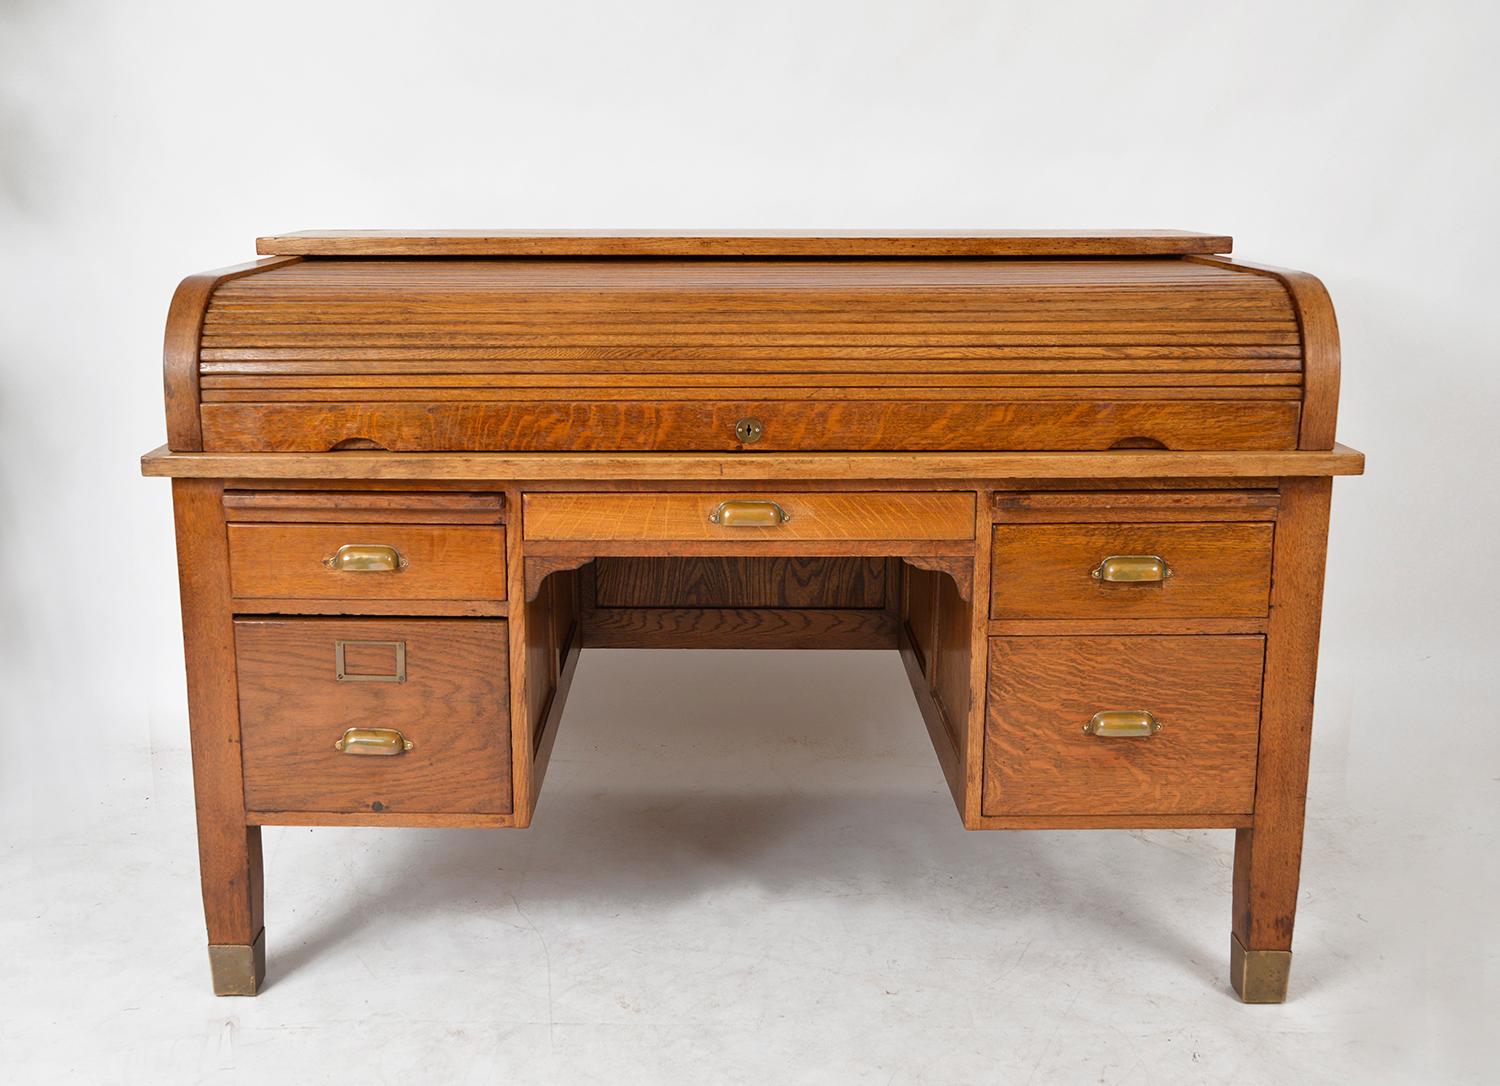 Early 20th Century 1920s English Antique Oak Desk D Shaped Tambour Roll Top Library Home Office